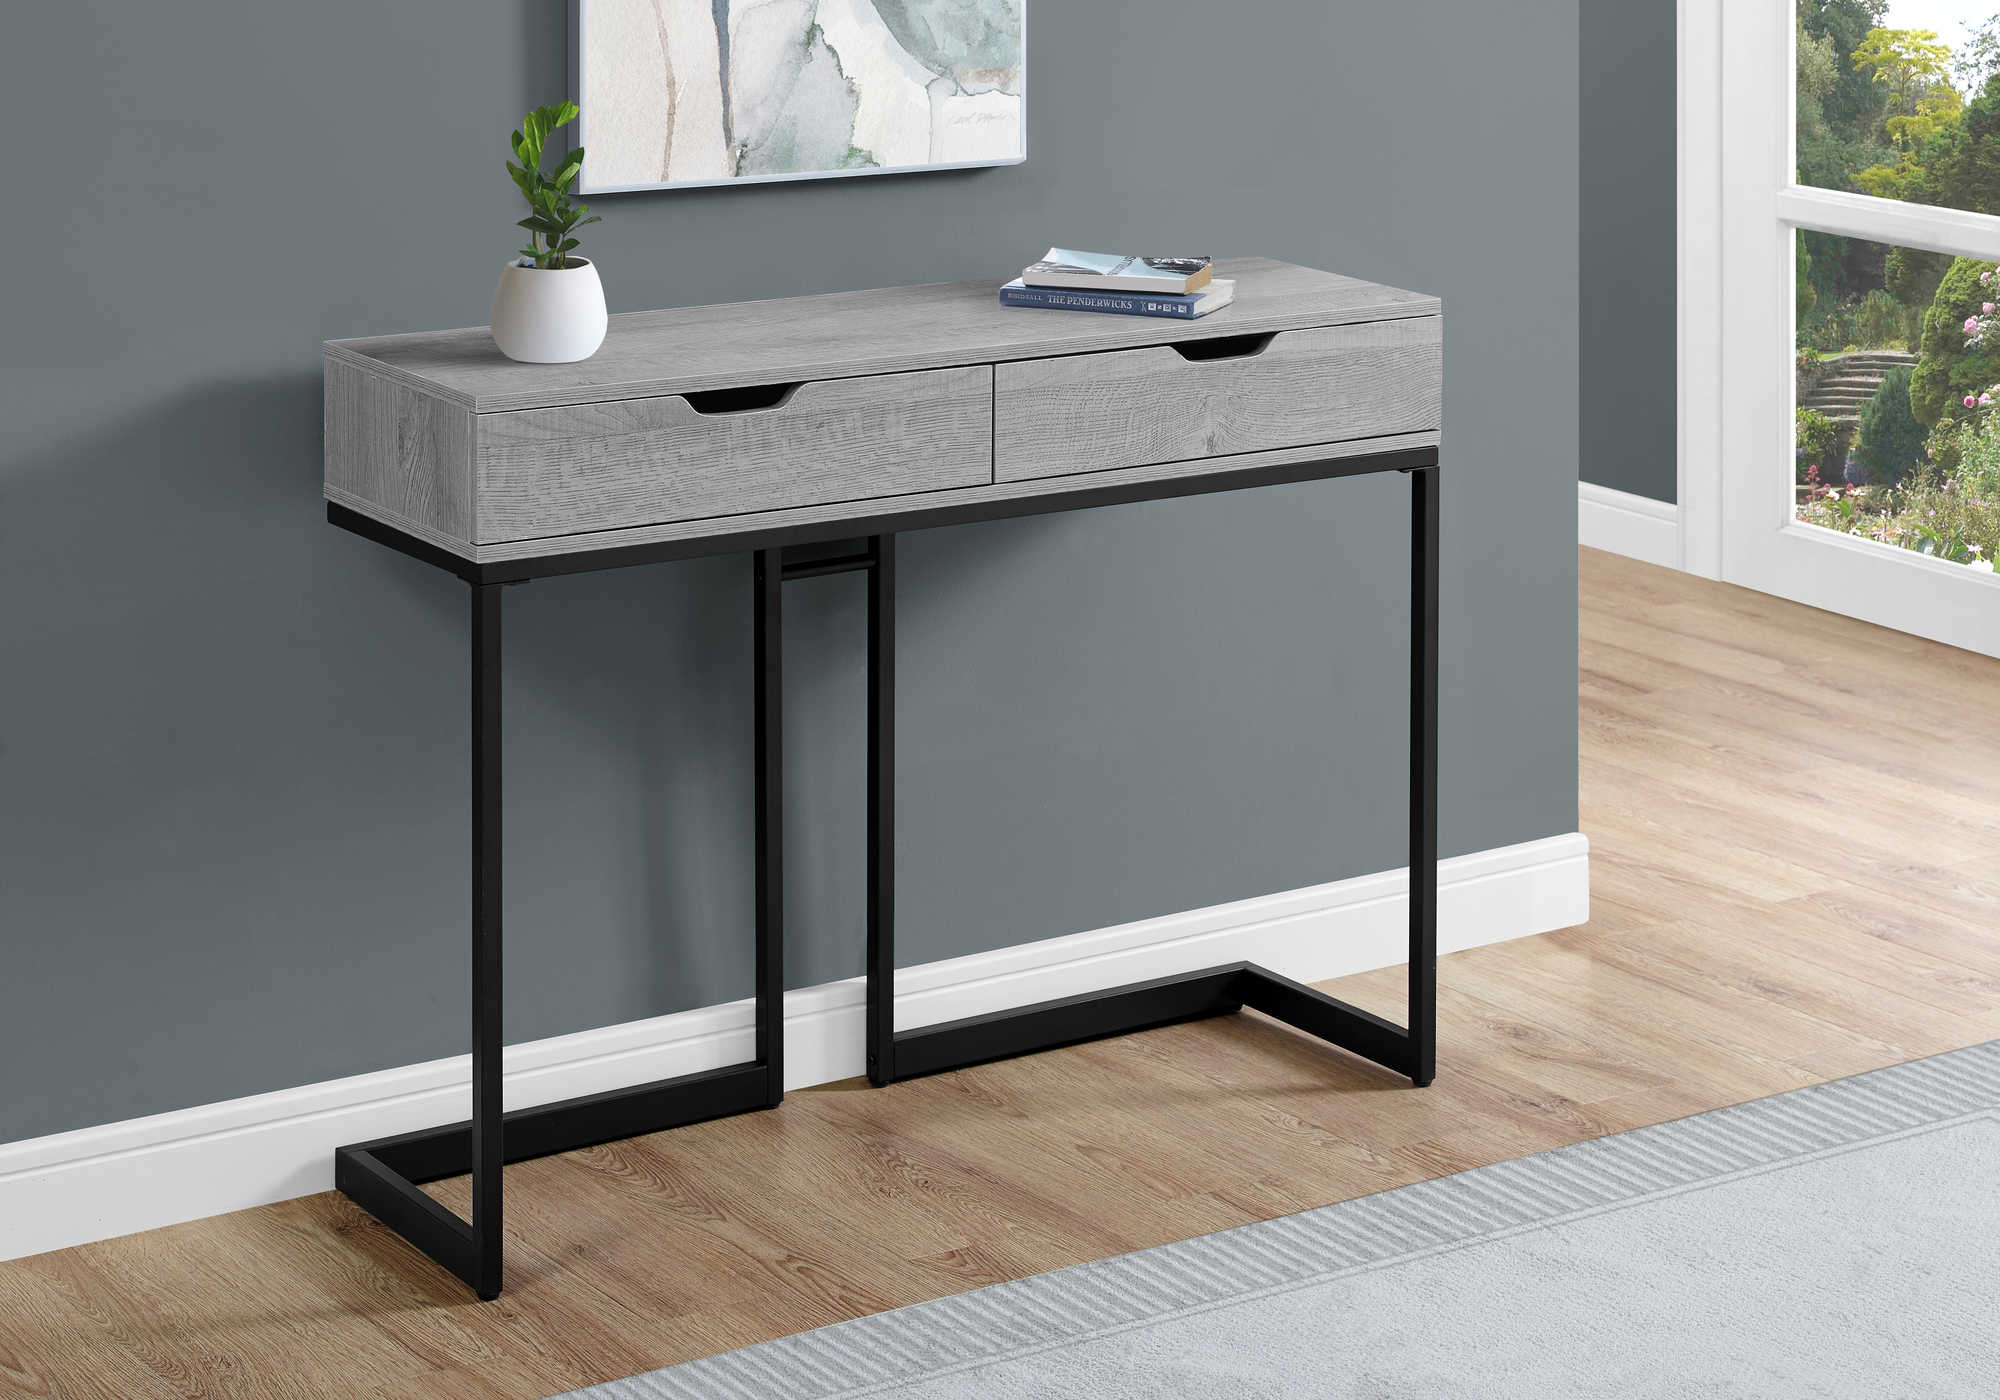 BEDROOM ACCENT CONSOLE TABLE - 42"L / GREY/ BLACK METAL HALL CONSOLE